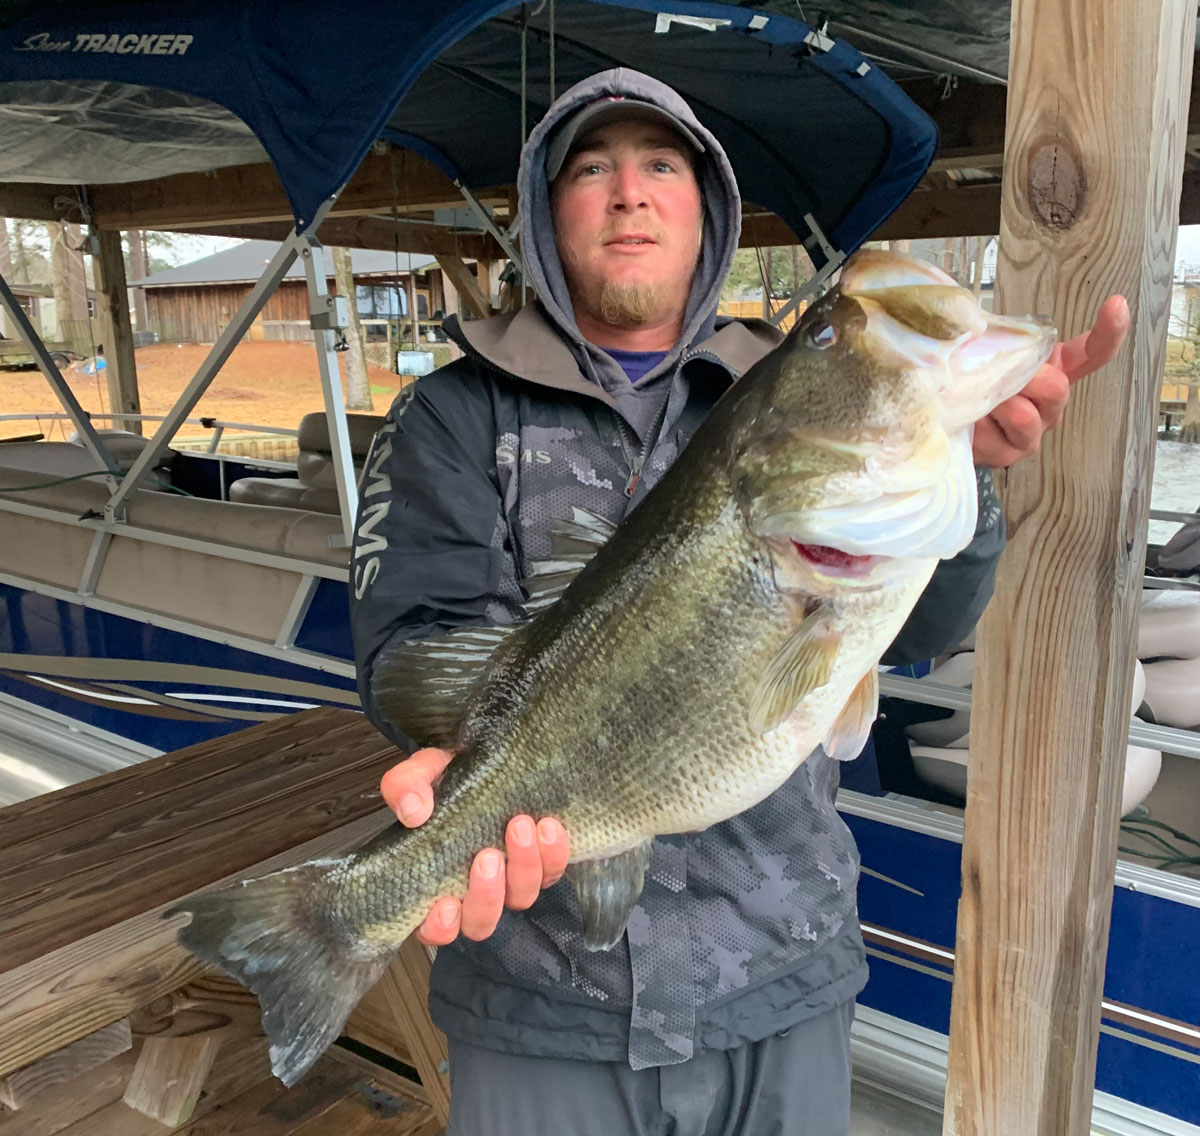 Chatham’s Heath Kennedy had his personal best day on Caney in horrific conditions on Feb. 25. The top prize? This 10.27 lunker largemouth.